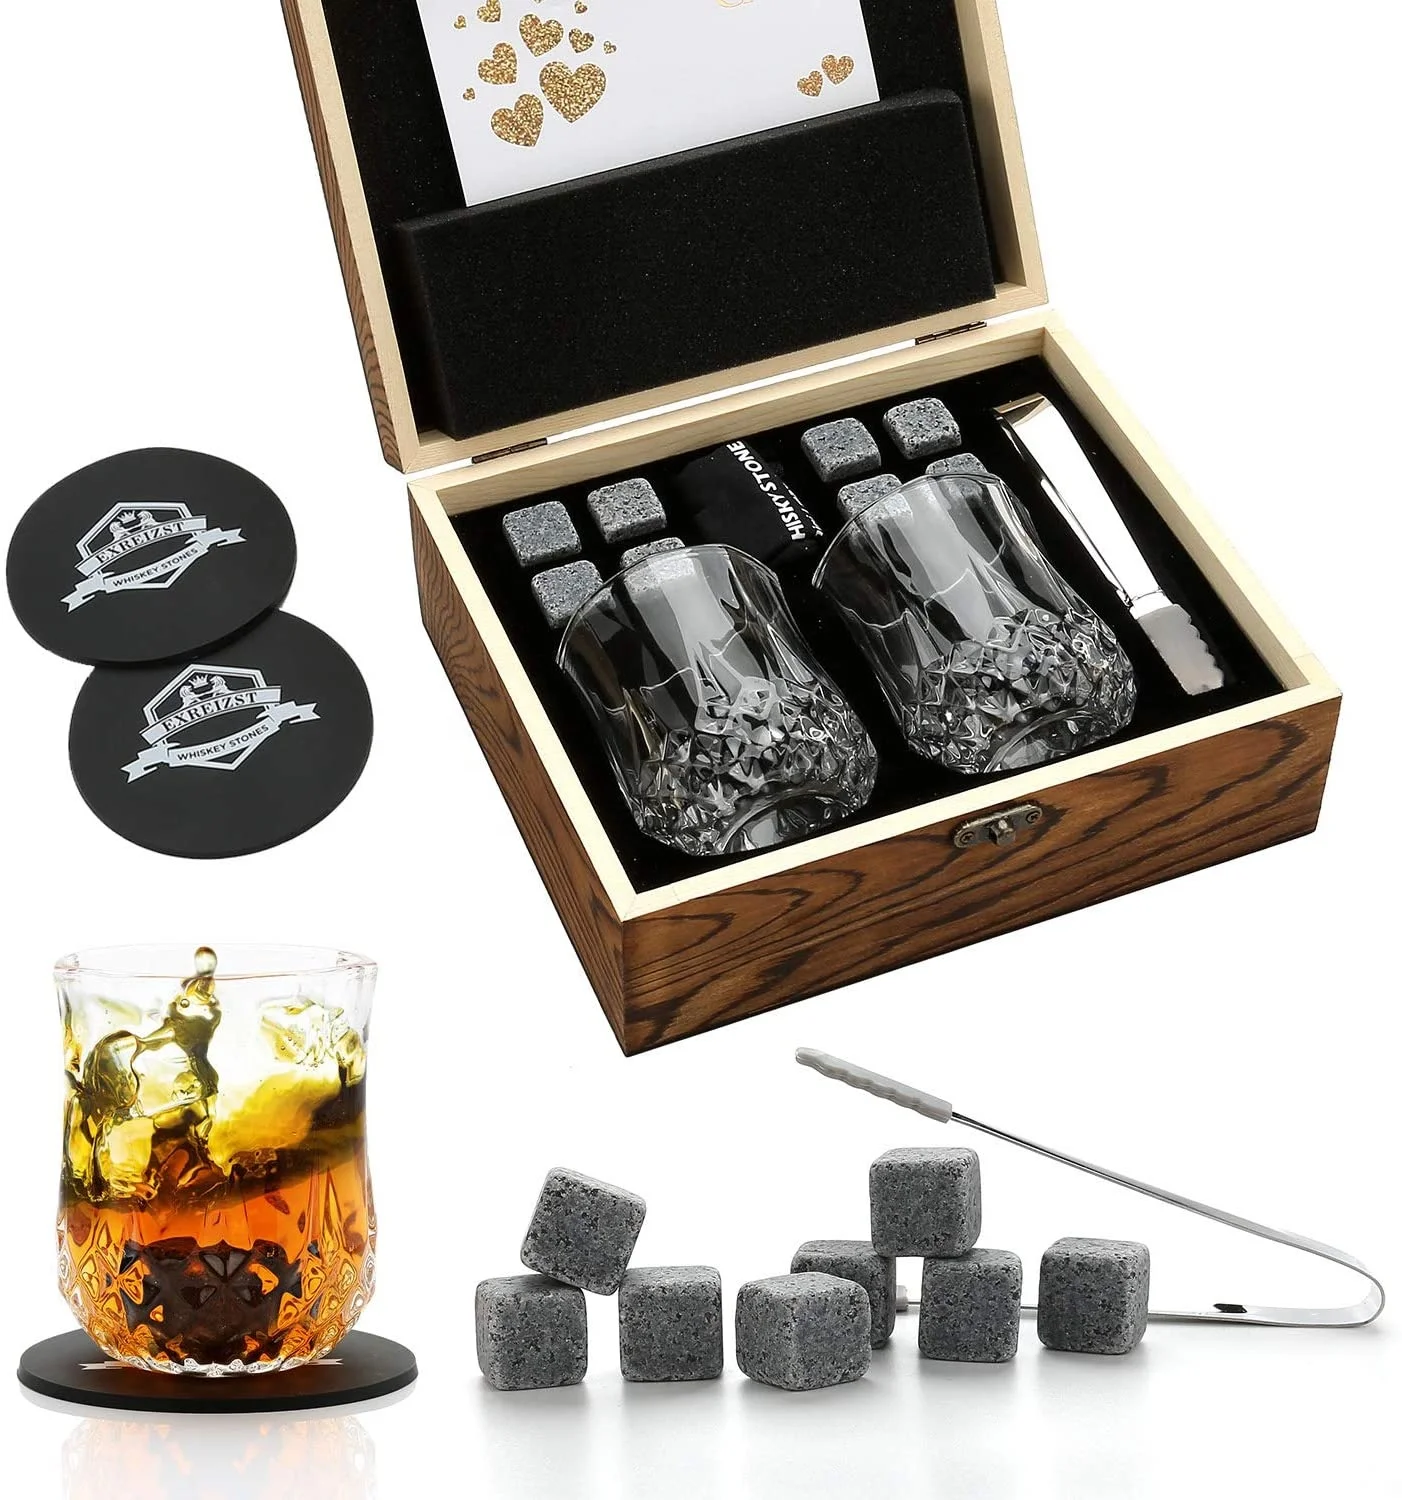 

Most Popular Whiskey Stones and Whiskey Glass Gift Box Set For Men Bar Accessories Granite Chilling Whisky Rocks With Coaster